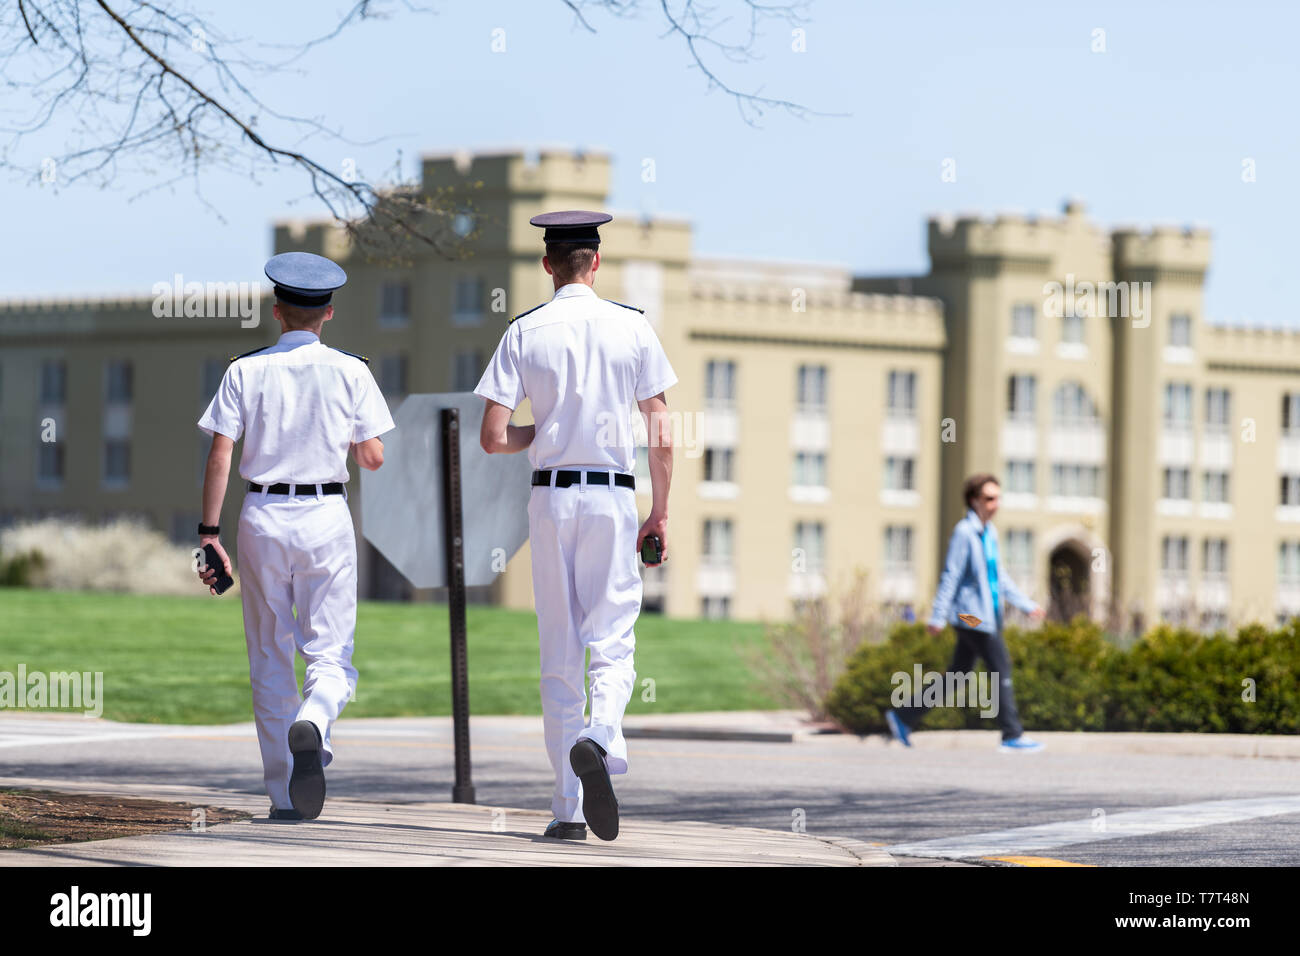 Lexington, USA - April 18, 2018: Men, male cadets students in white uniforms with phones walking at Virginia Military Institute main campus grounds in Stock Photo